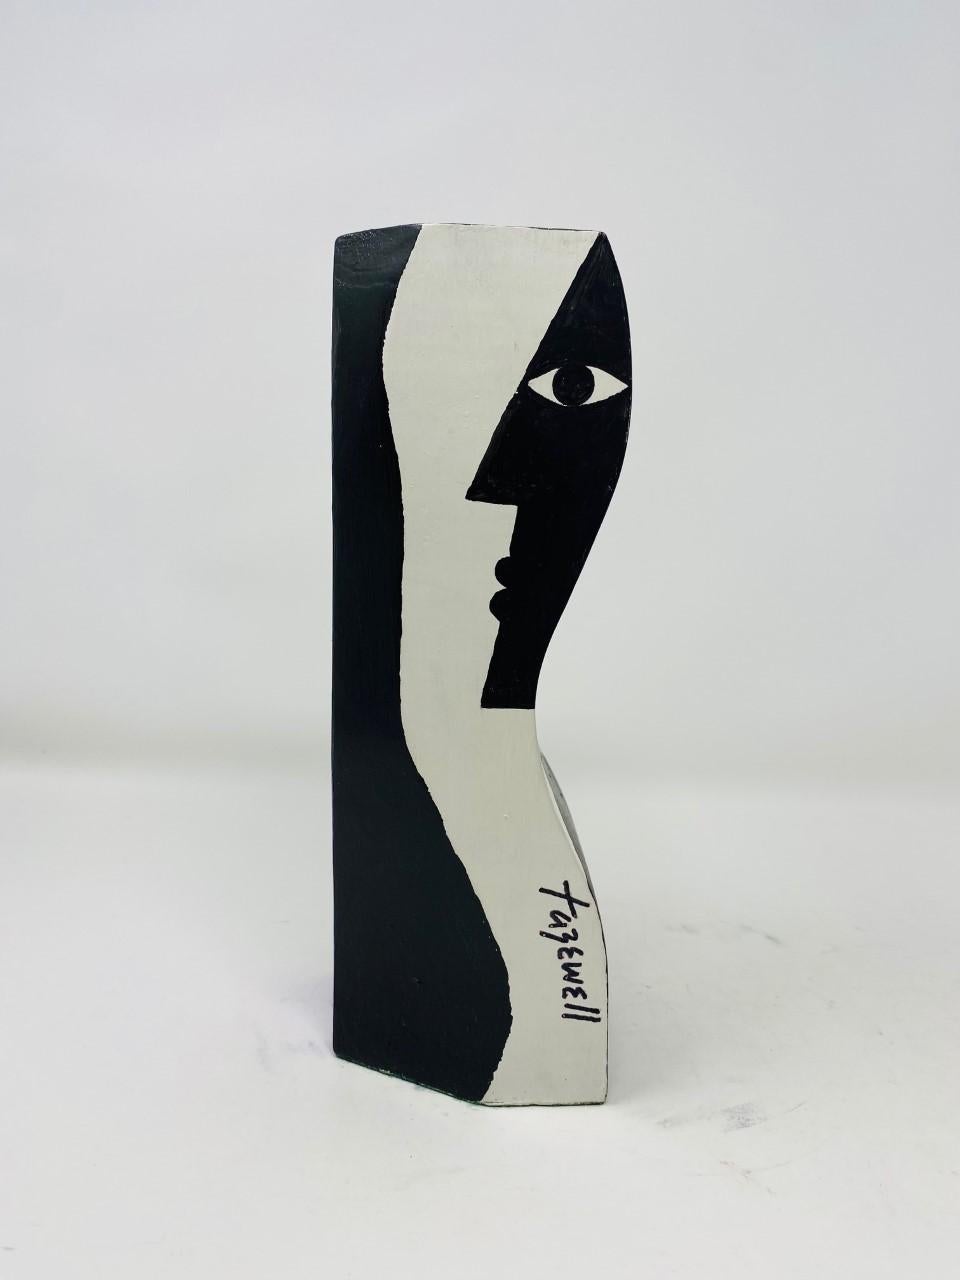 Beautiful artist candleholder by Tazewell. Handmade piece by artist Tazewell that combines whimsical and highly graphic details. The candleholder is crafted out of a single piece of wood with a variety of images on each side. On one side, a male